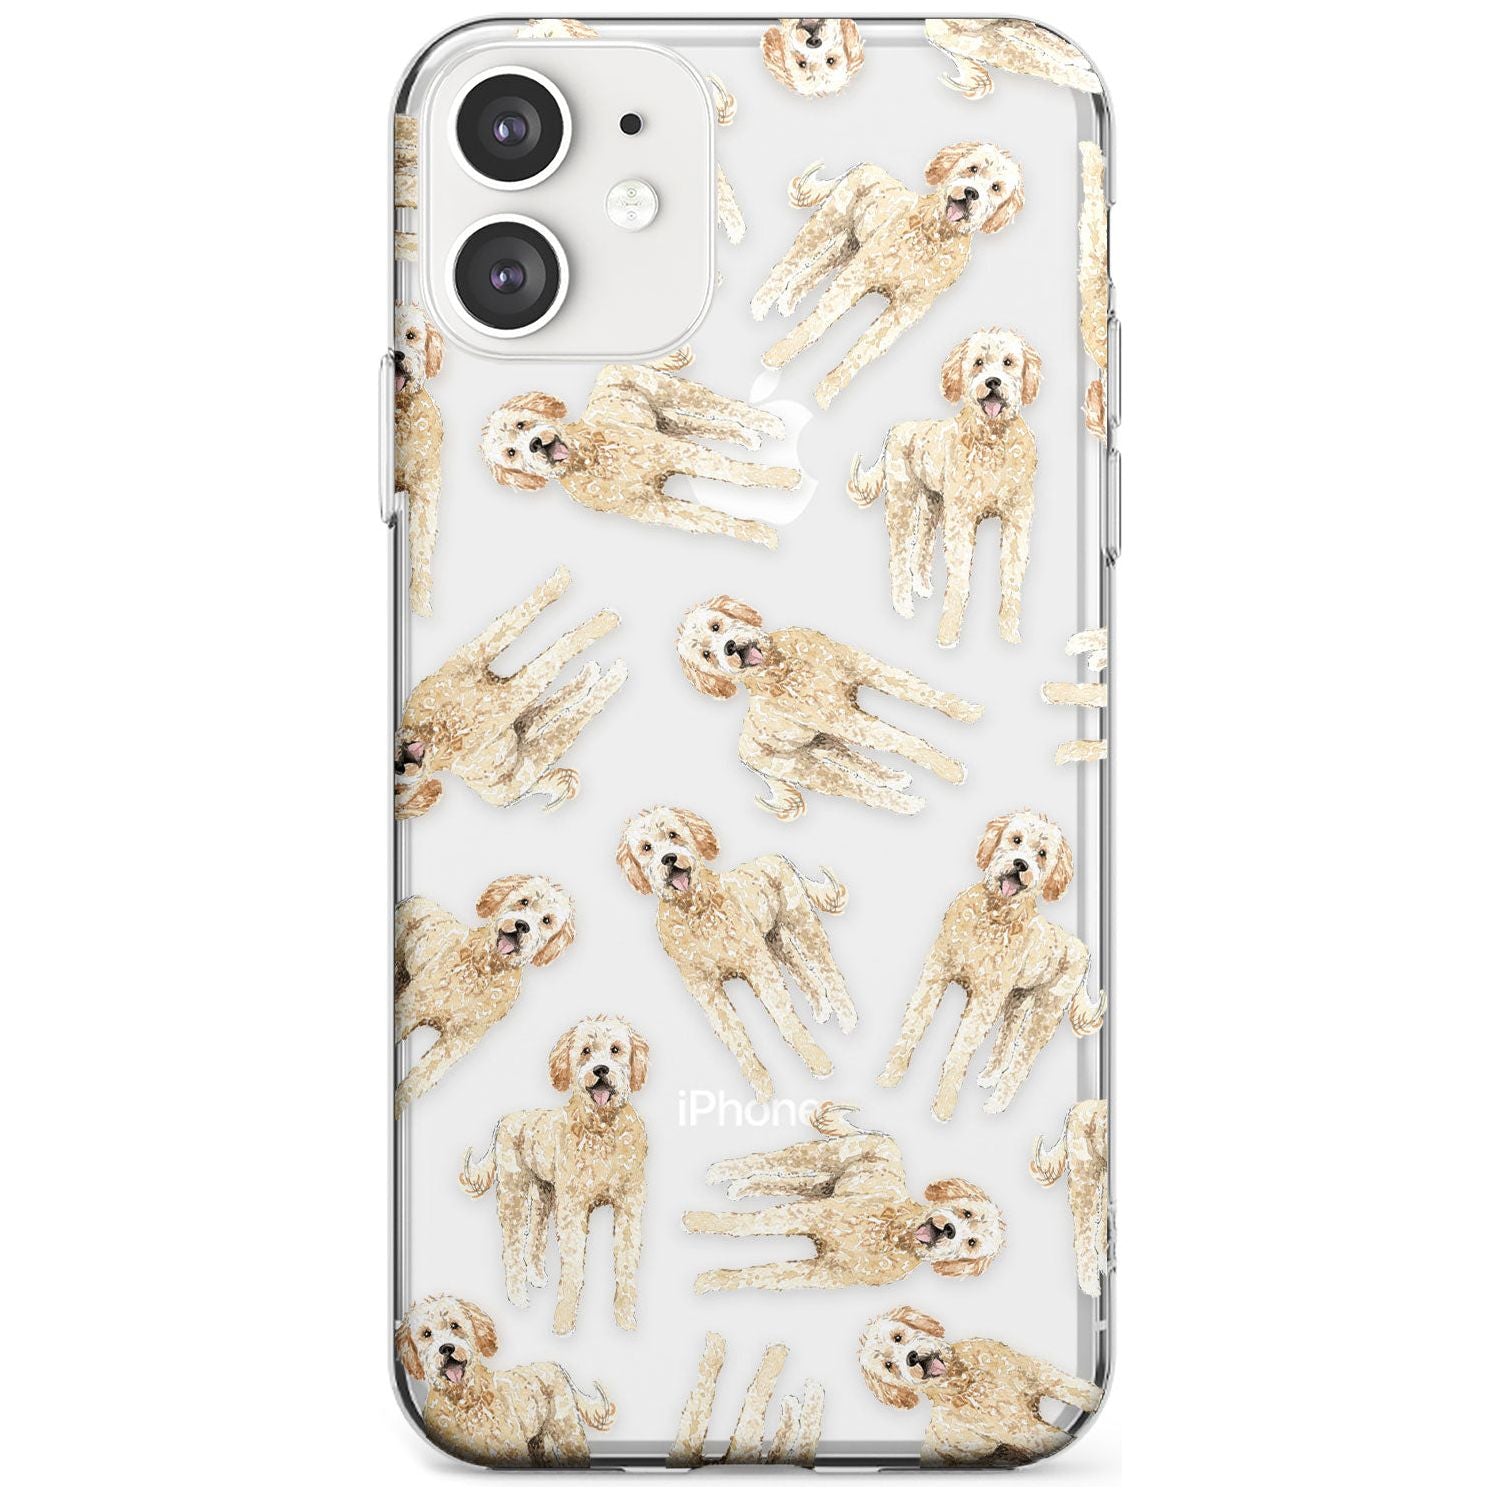 Goldendoodle Watercolour Dog Pattern Slim TPU Phone Case for iPhone 11